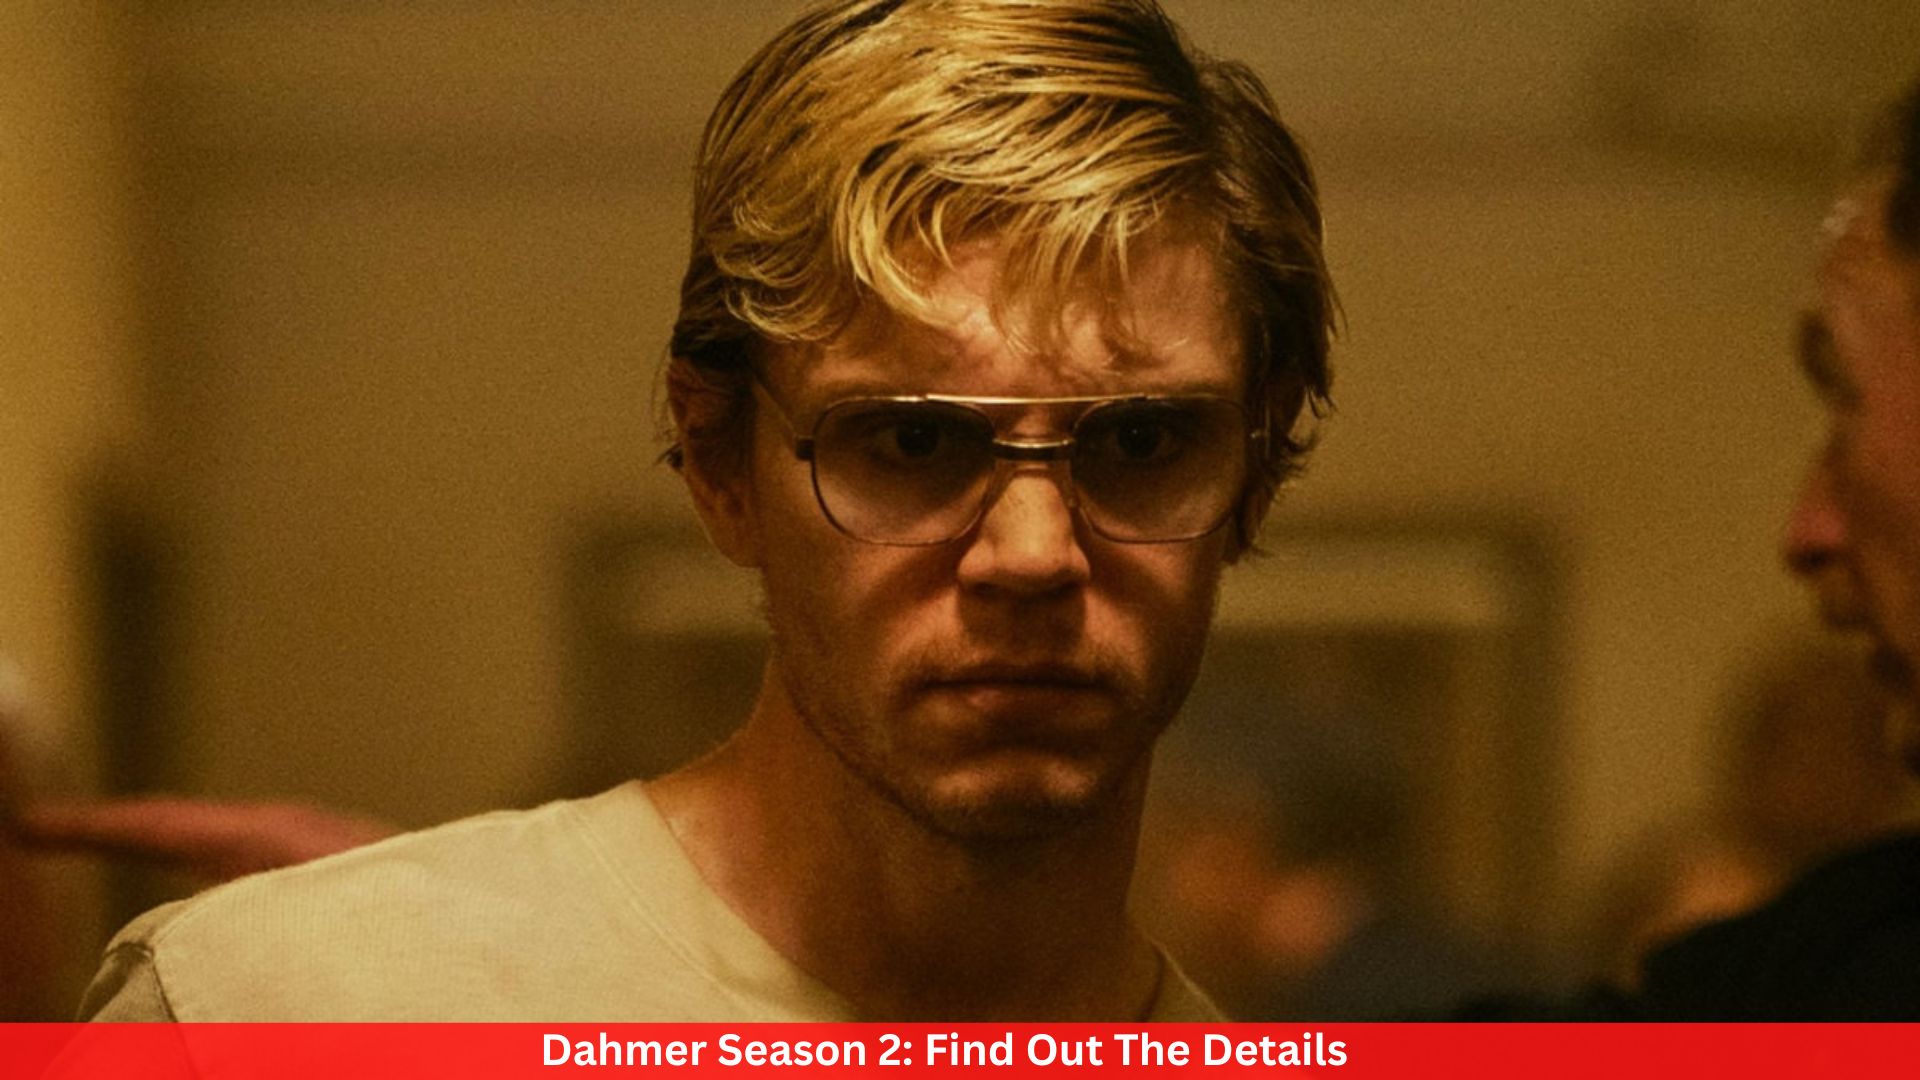 Dahmer Season 2: Find Out The Details